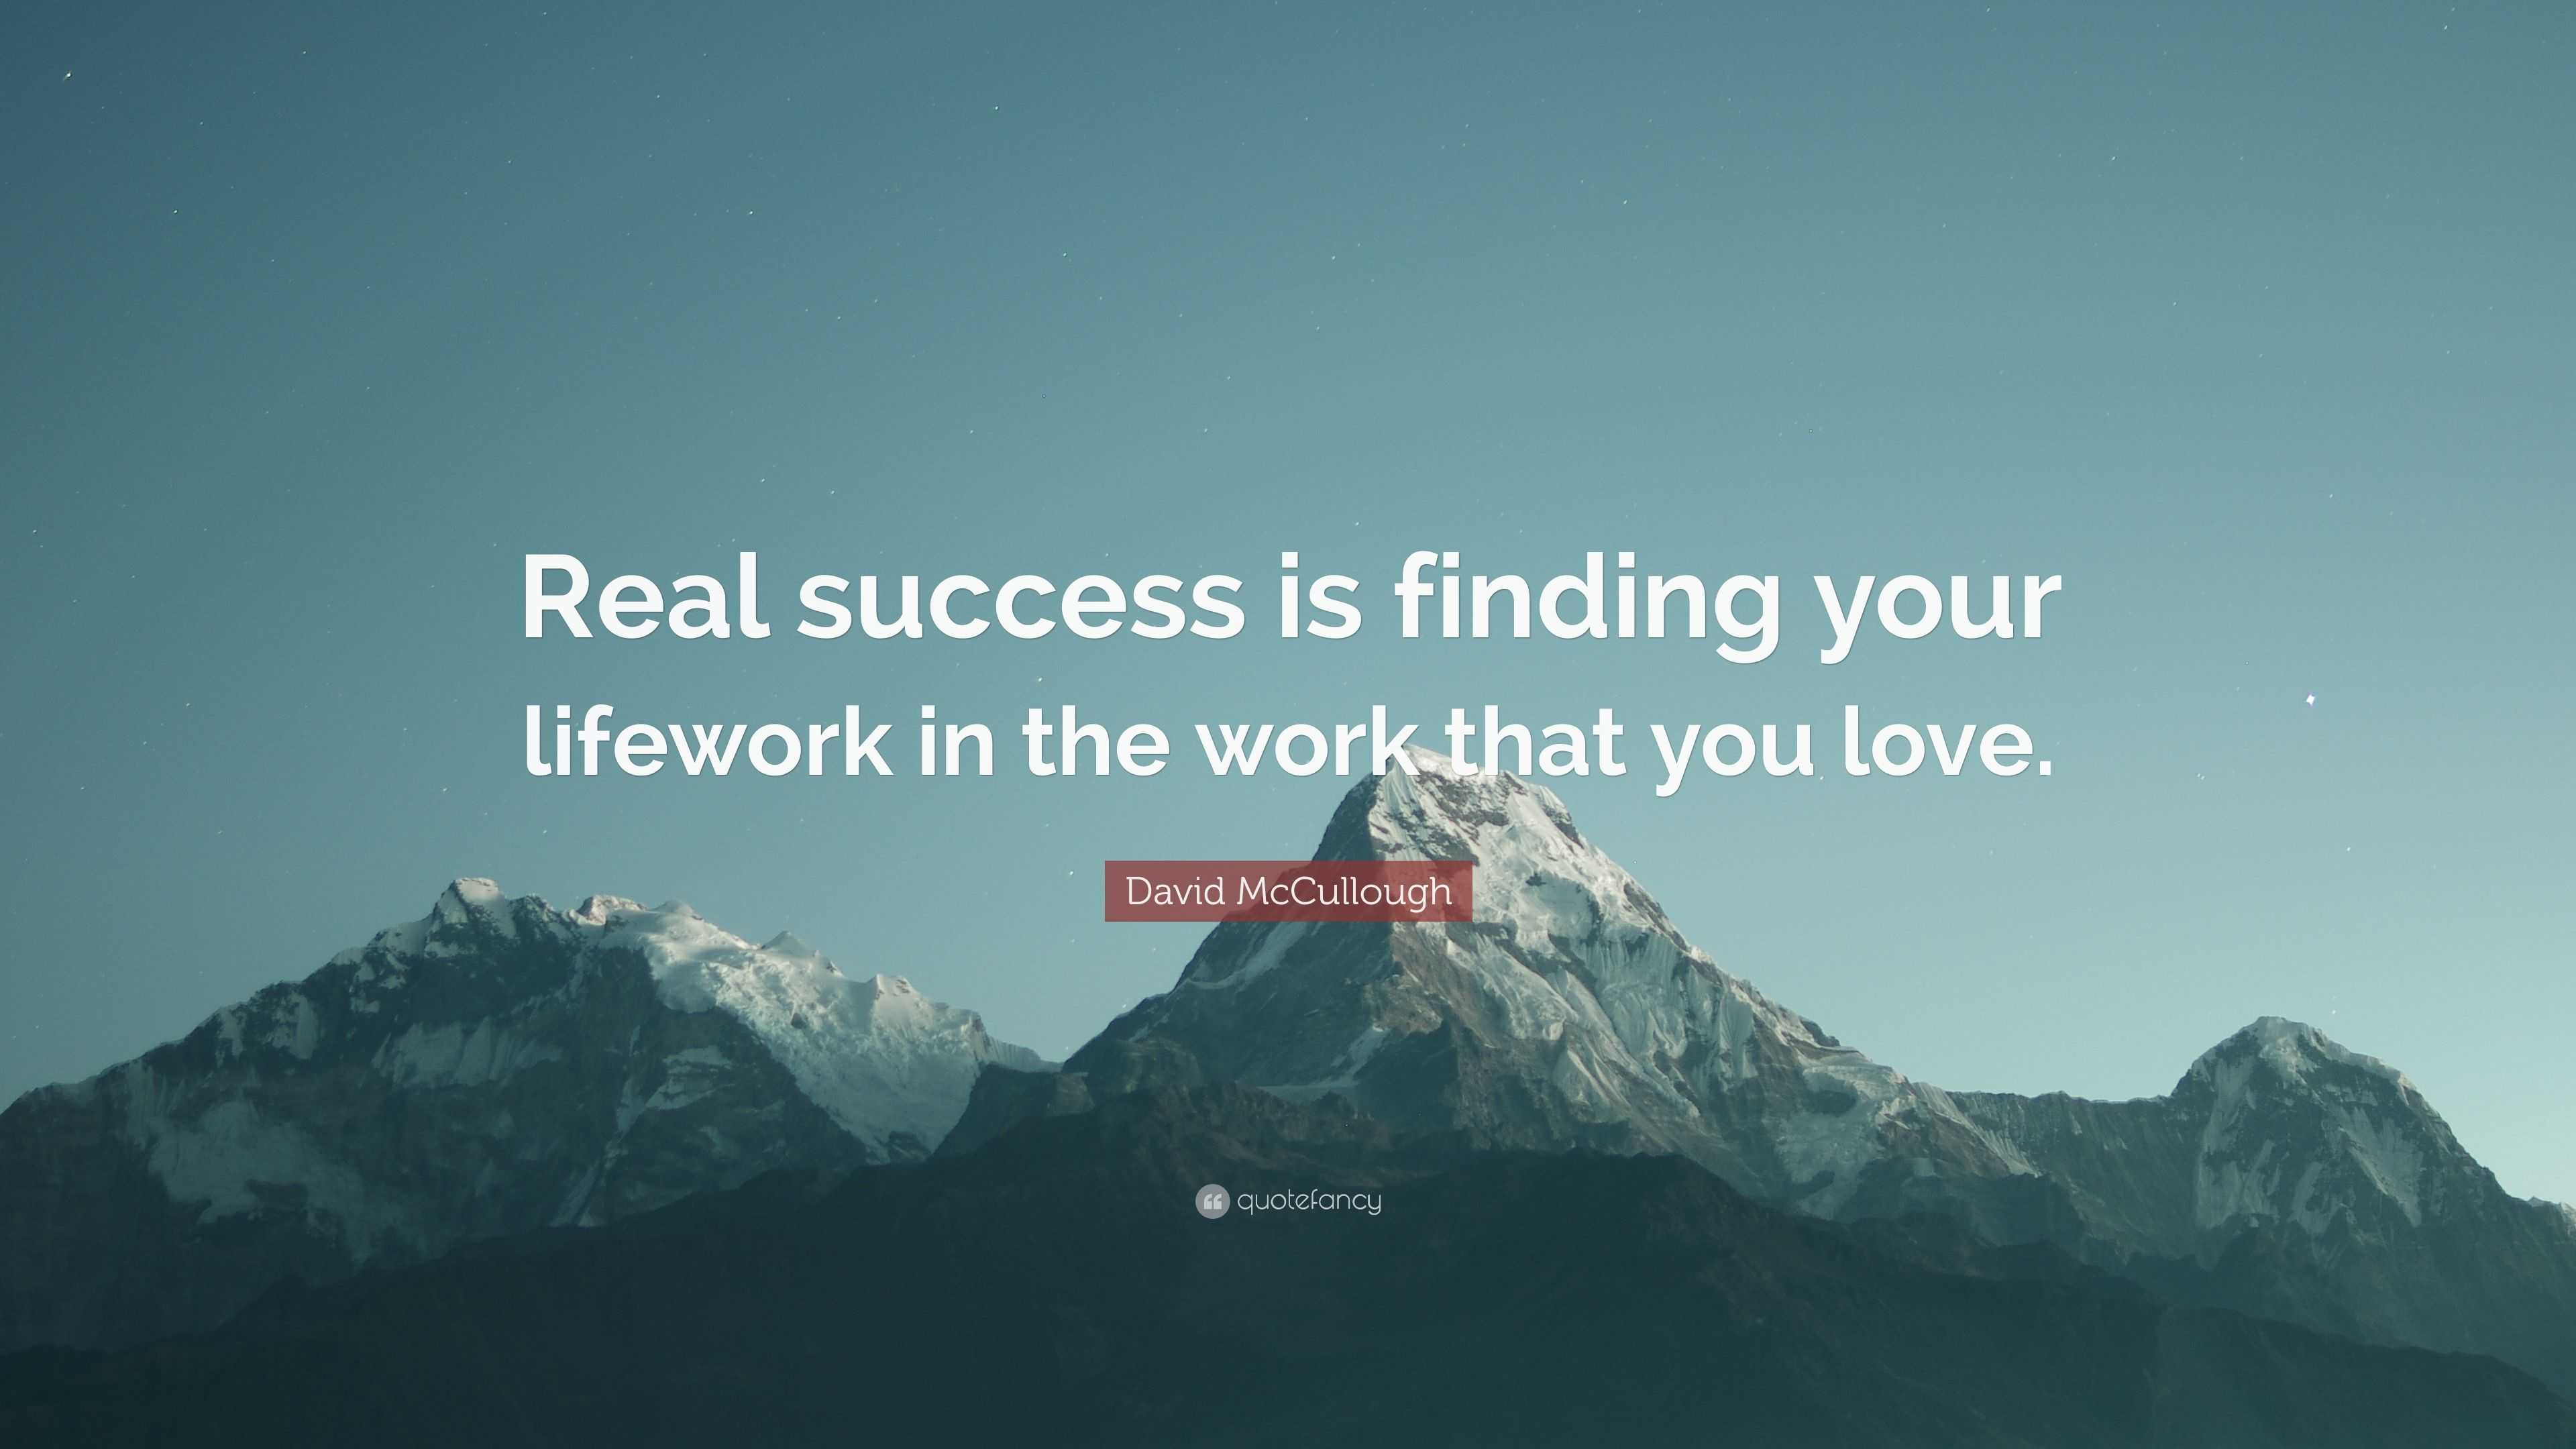 David McCullough Quote “Real success is finding your lifework in the work that you